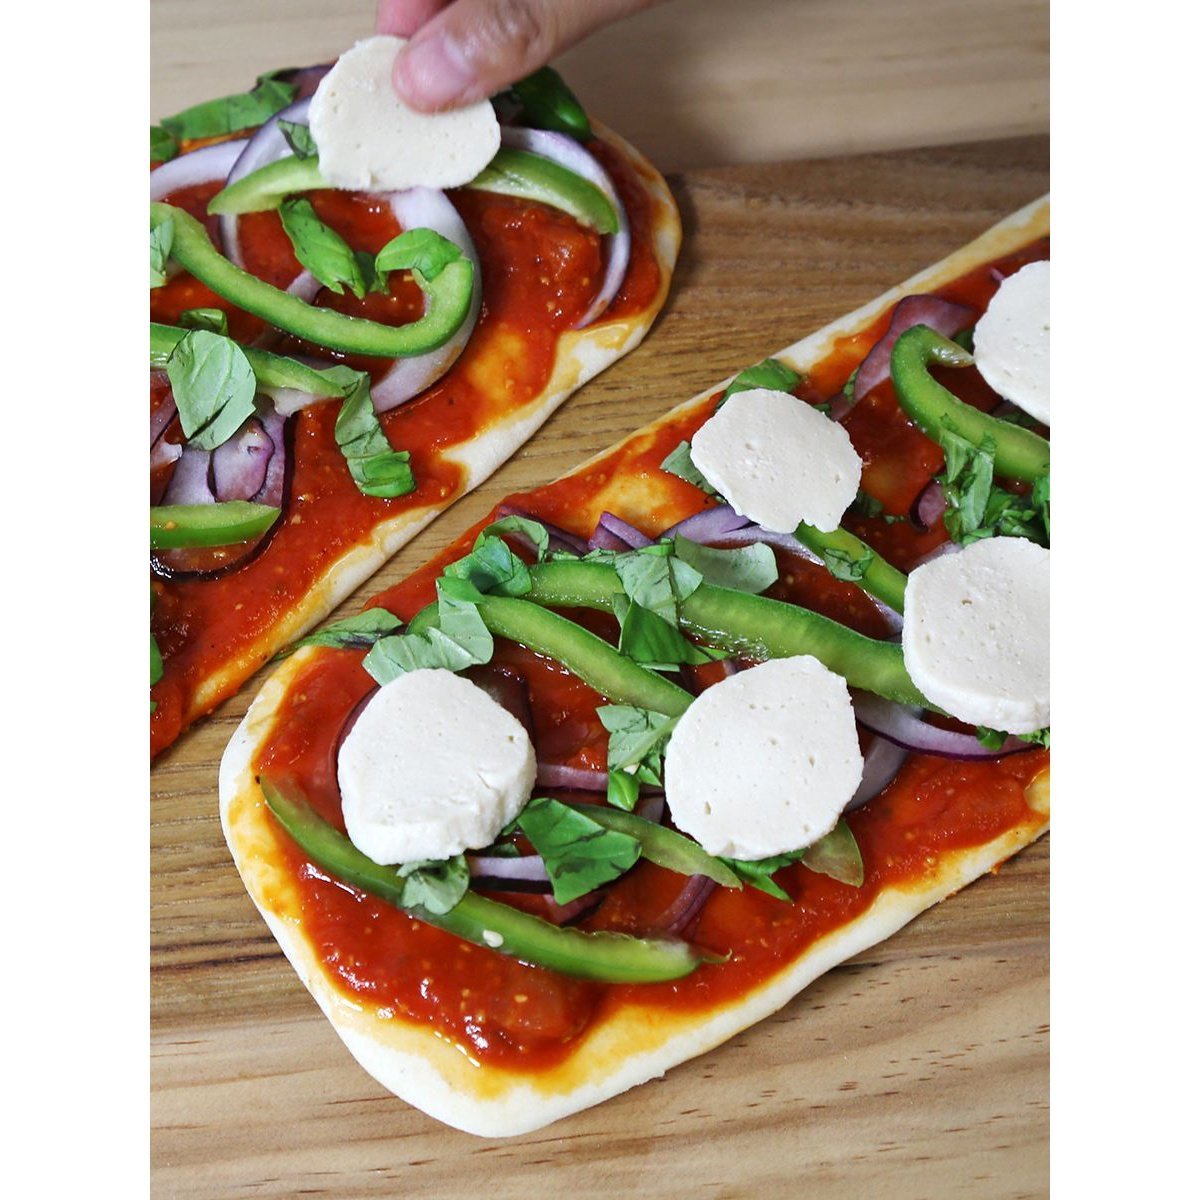 Pizza with Mozzarella, Made with the Vegan Cheese Kit from Mad Millie